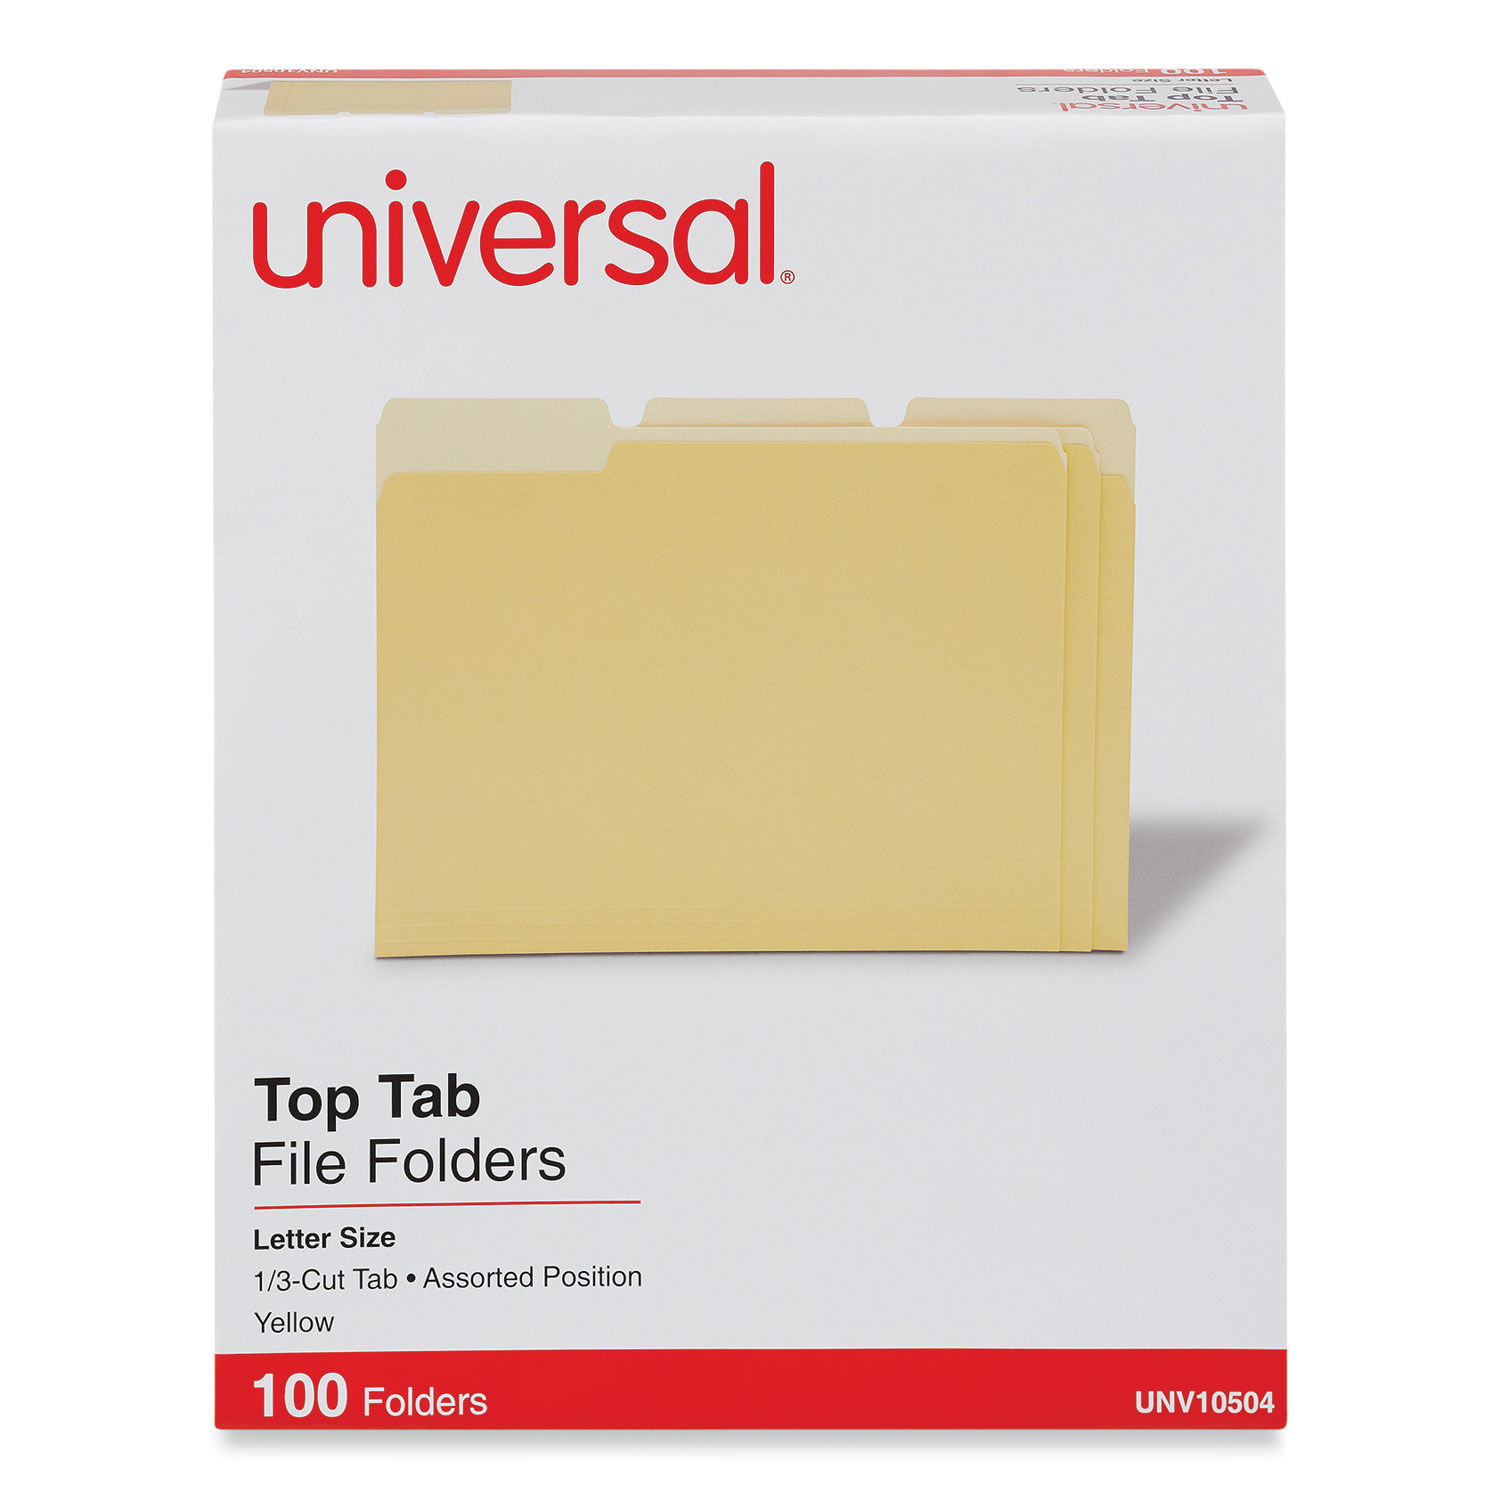 Deluxe Colored Top Tab File Folders 1/3-Cut Tabs: Assorted, Letter Size, Yellow/Light Yellow, 100/Box